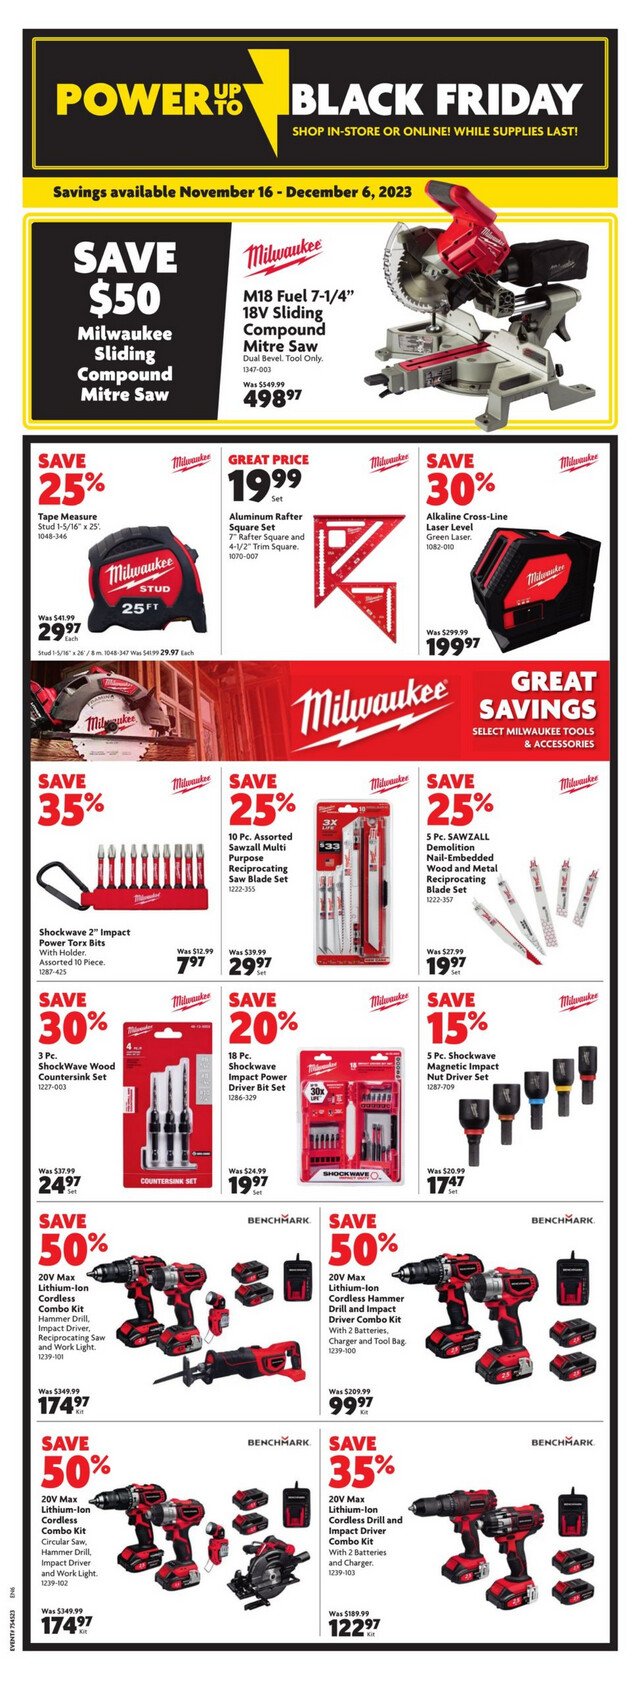 Home Hardware Flyer from 11/30/2023